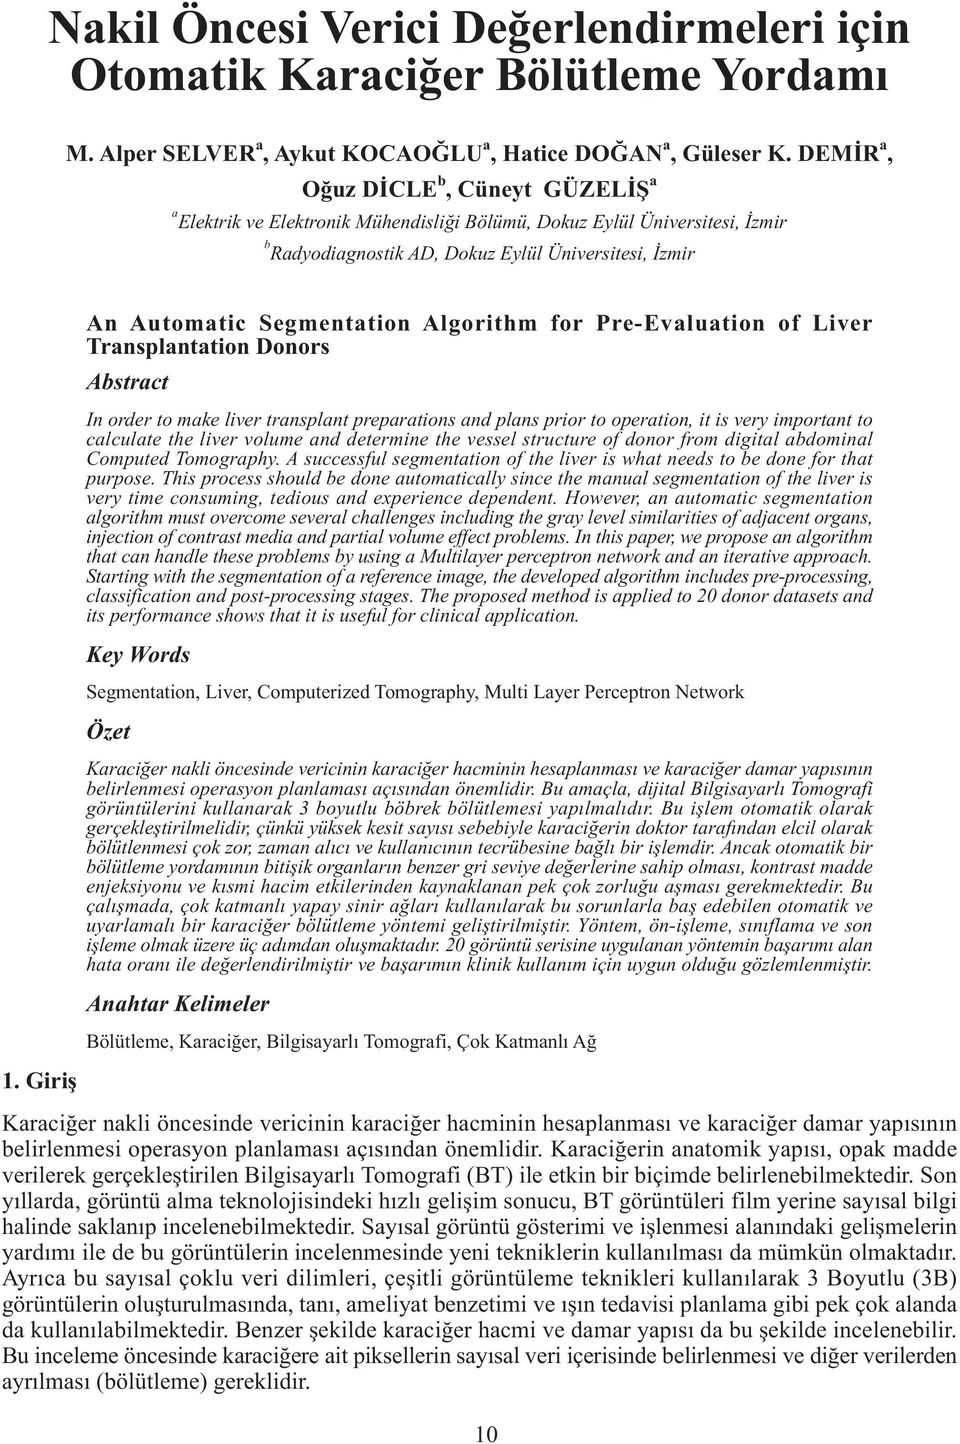 Giriş An Automtic Segmenttion Algorithm for Pre-Evlution of Liver Trnsplnttion Donors Abstrct In order to mke liver trnsplnt preprtions nd plns prior to opertion, it is very importnt to clculte the